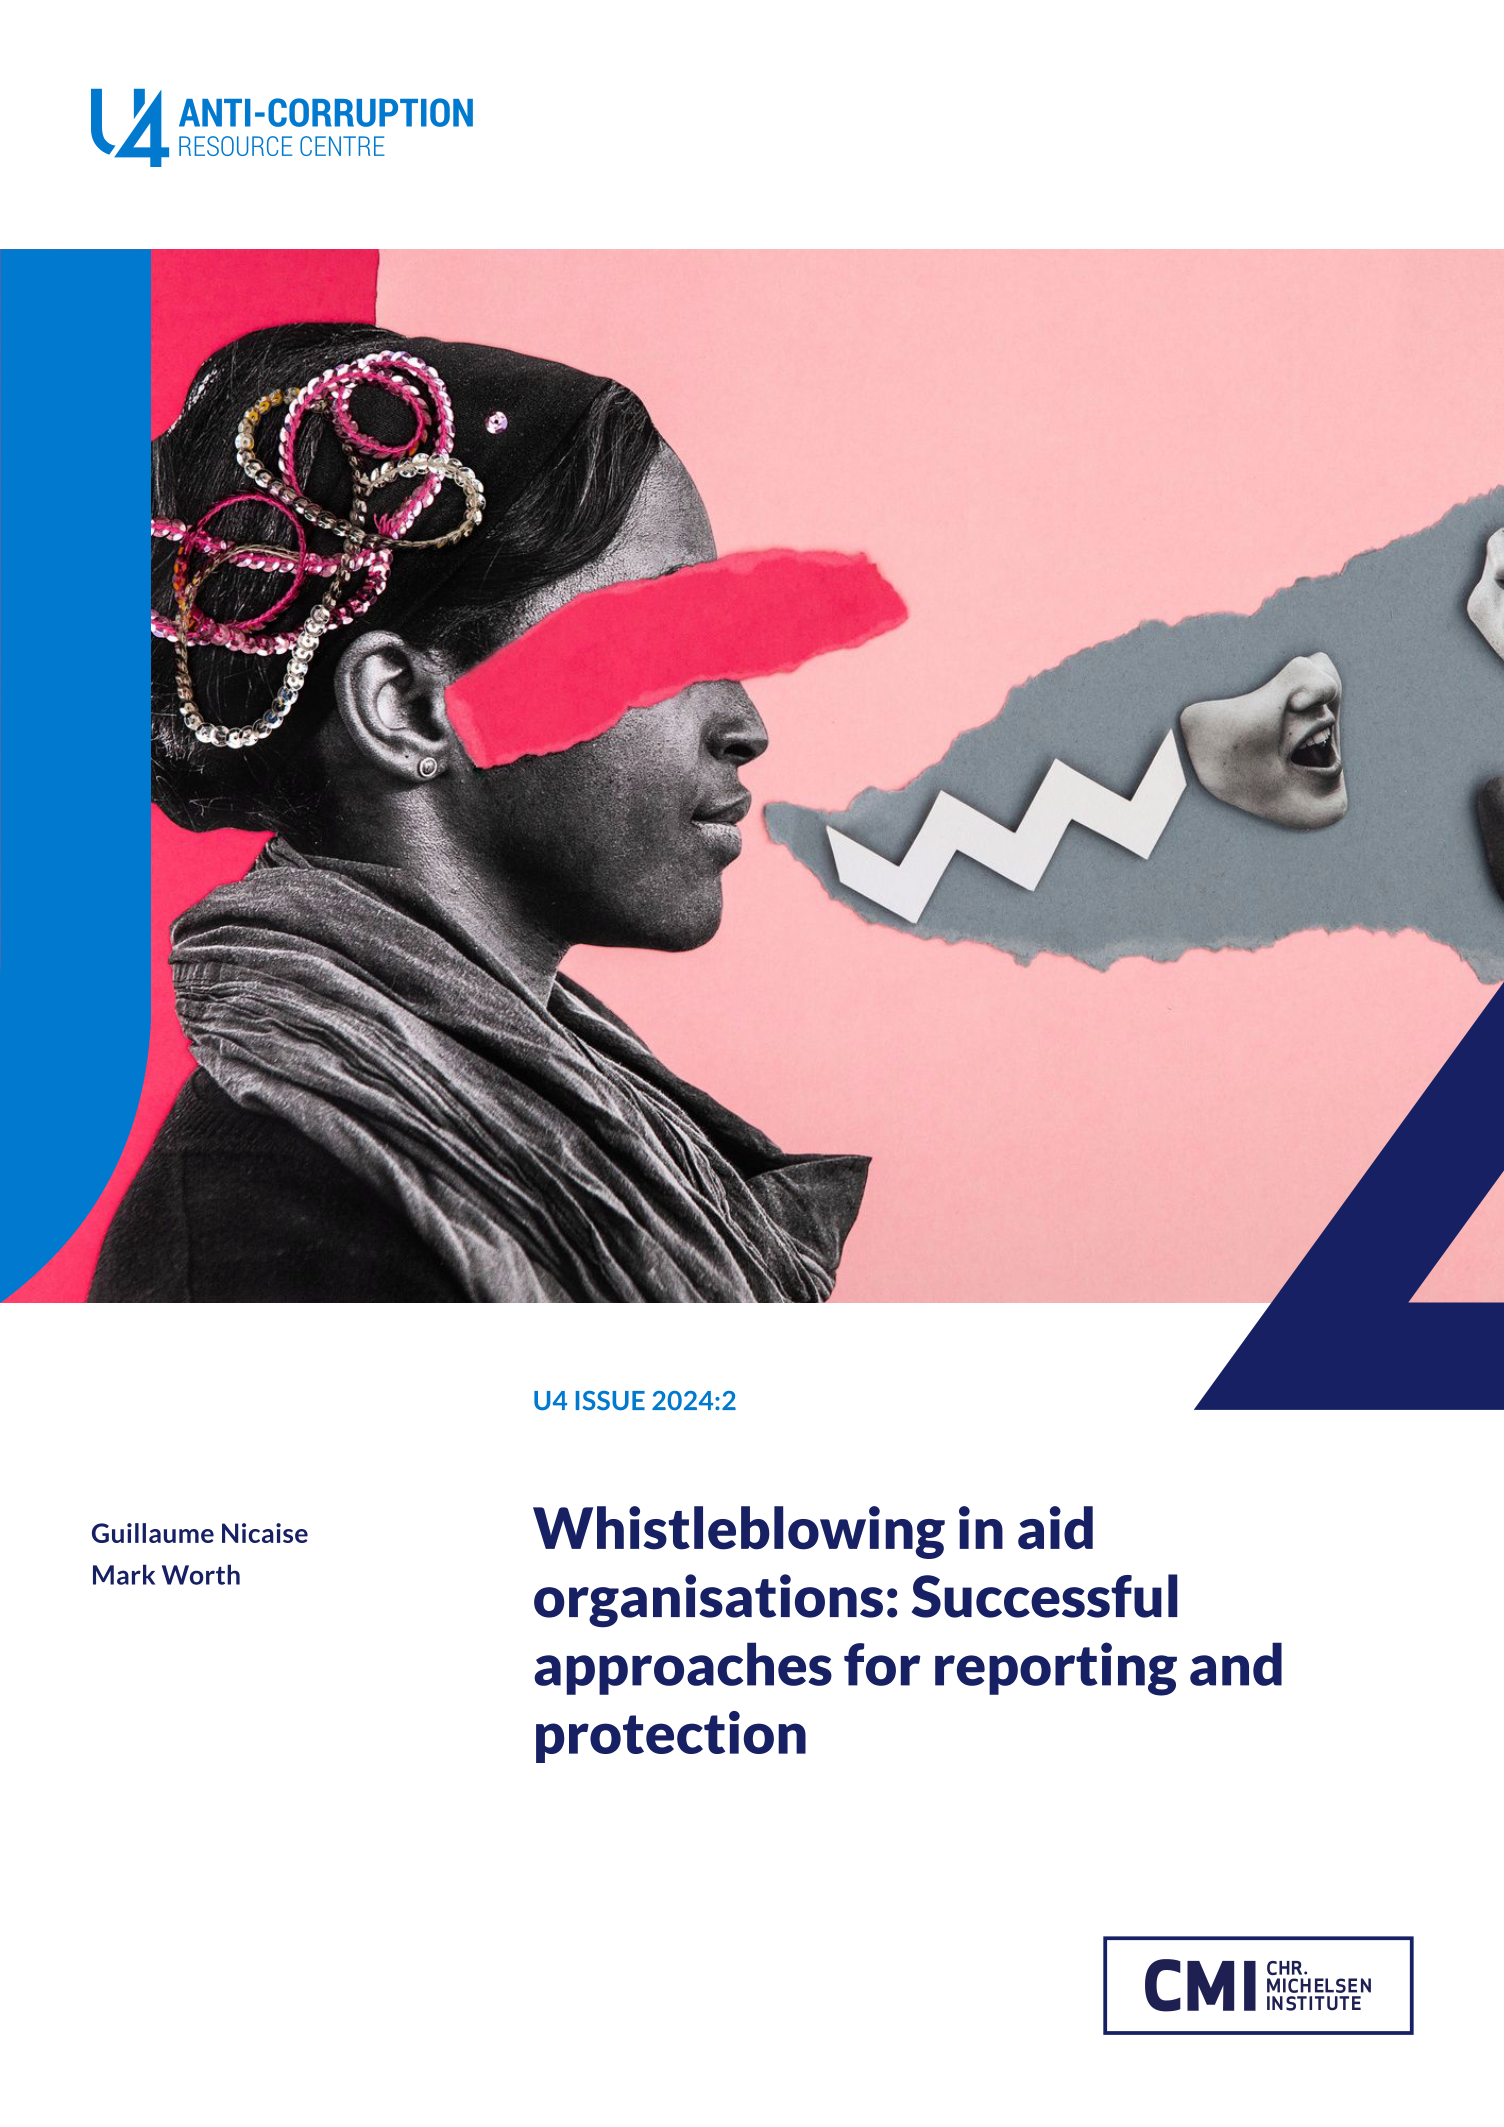 Whistleblowing in aid organisations: Successful approaches for reporting and protection